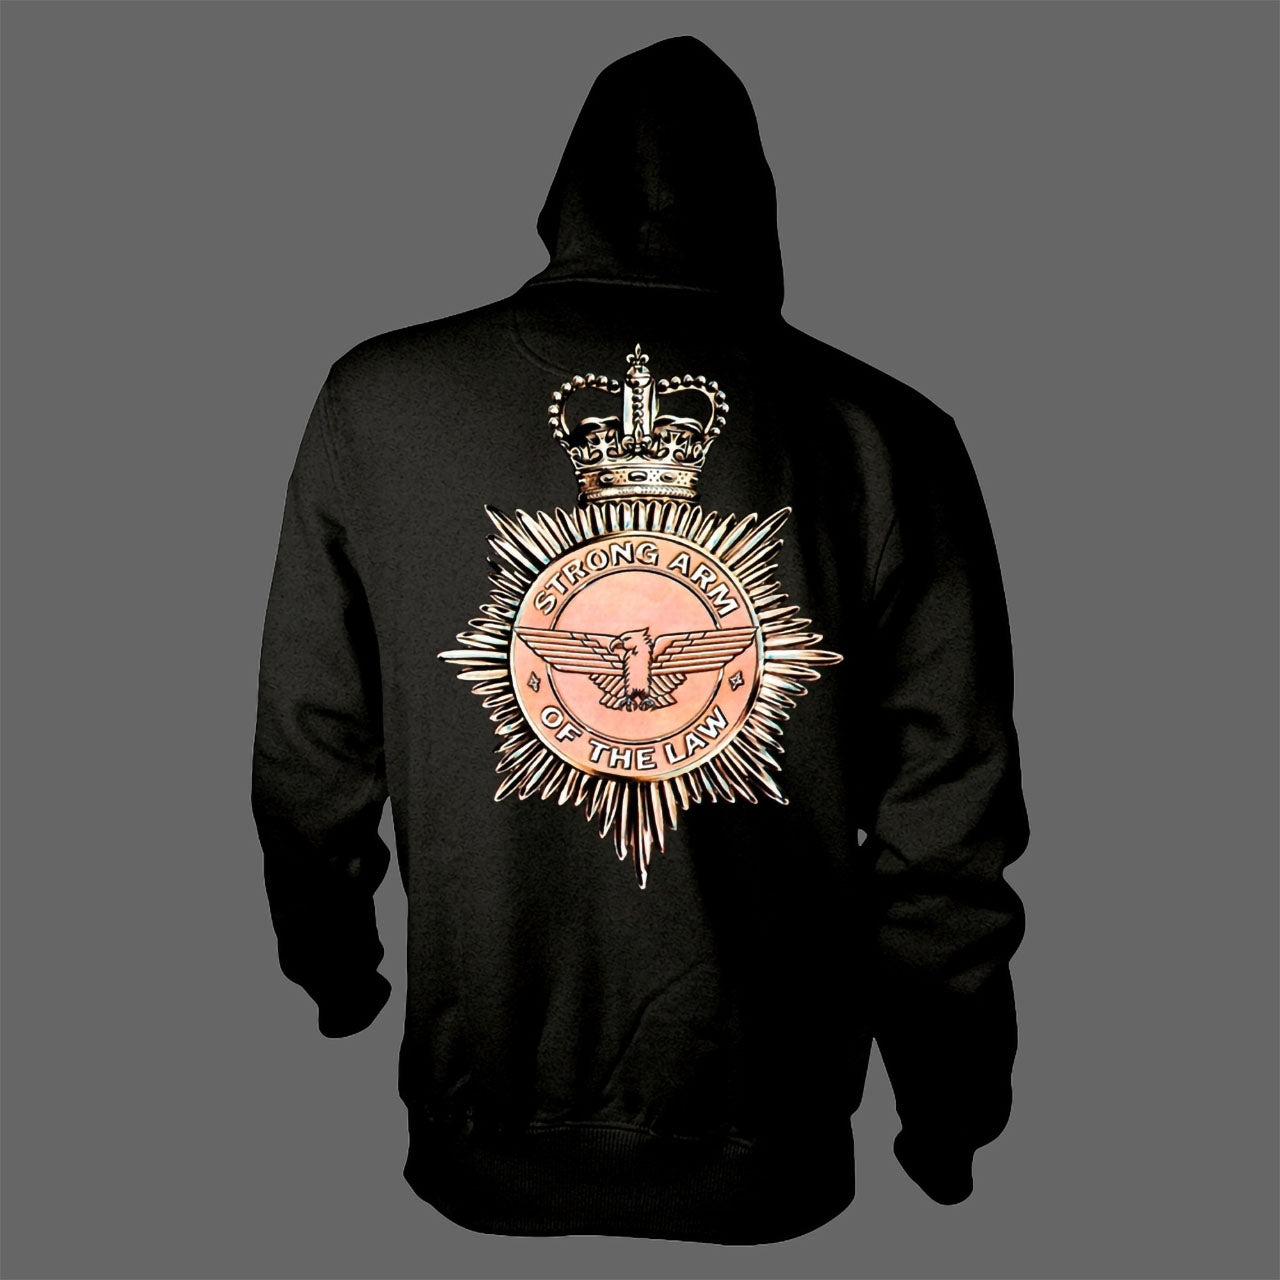 Saxon - Strong Arm of the Law (Full Zip Hoodie)